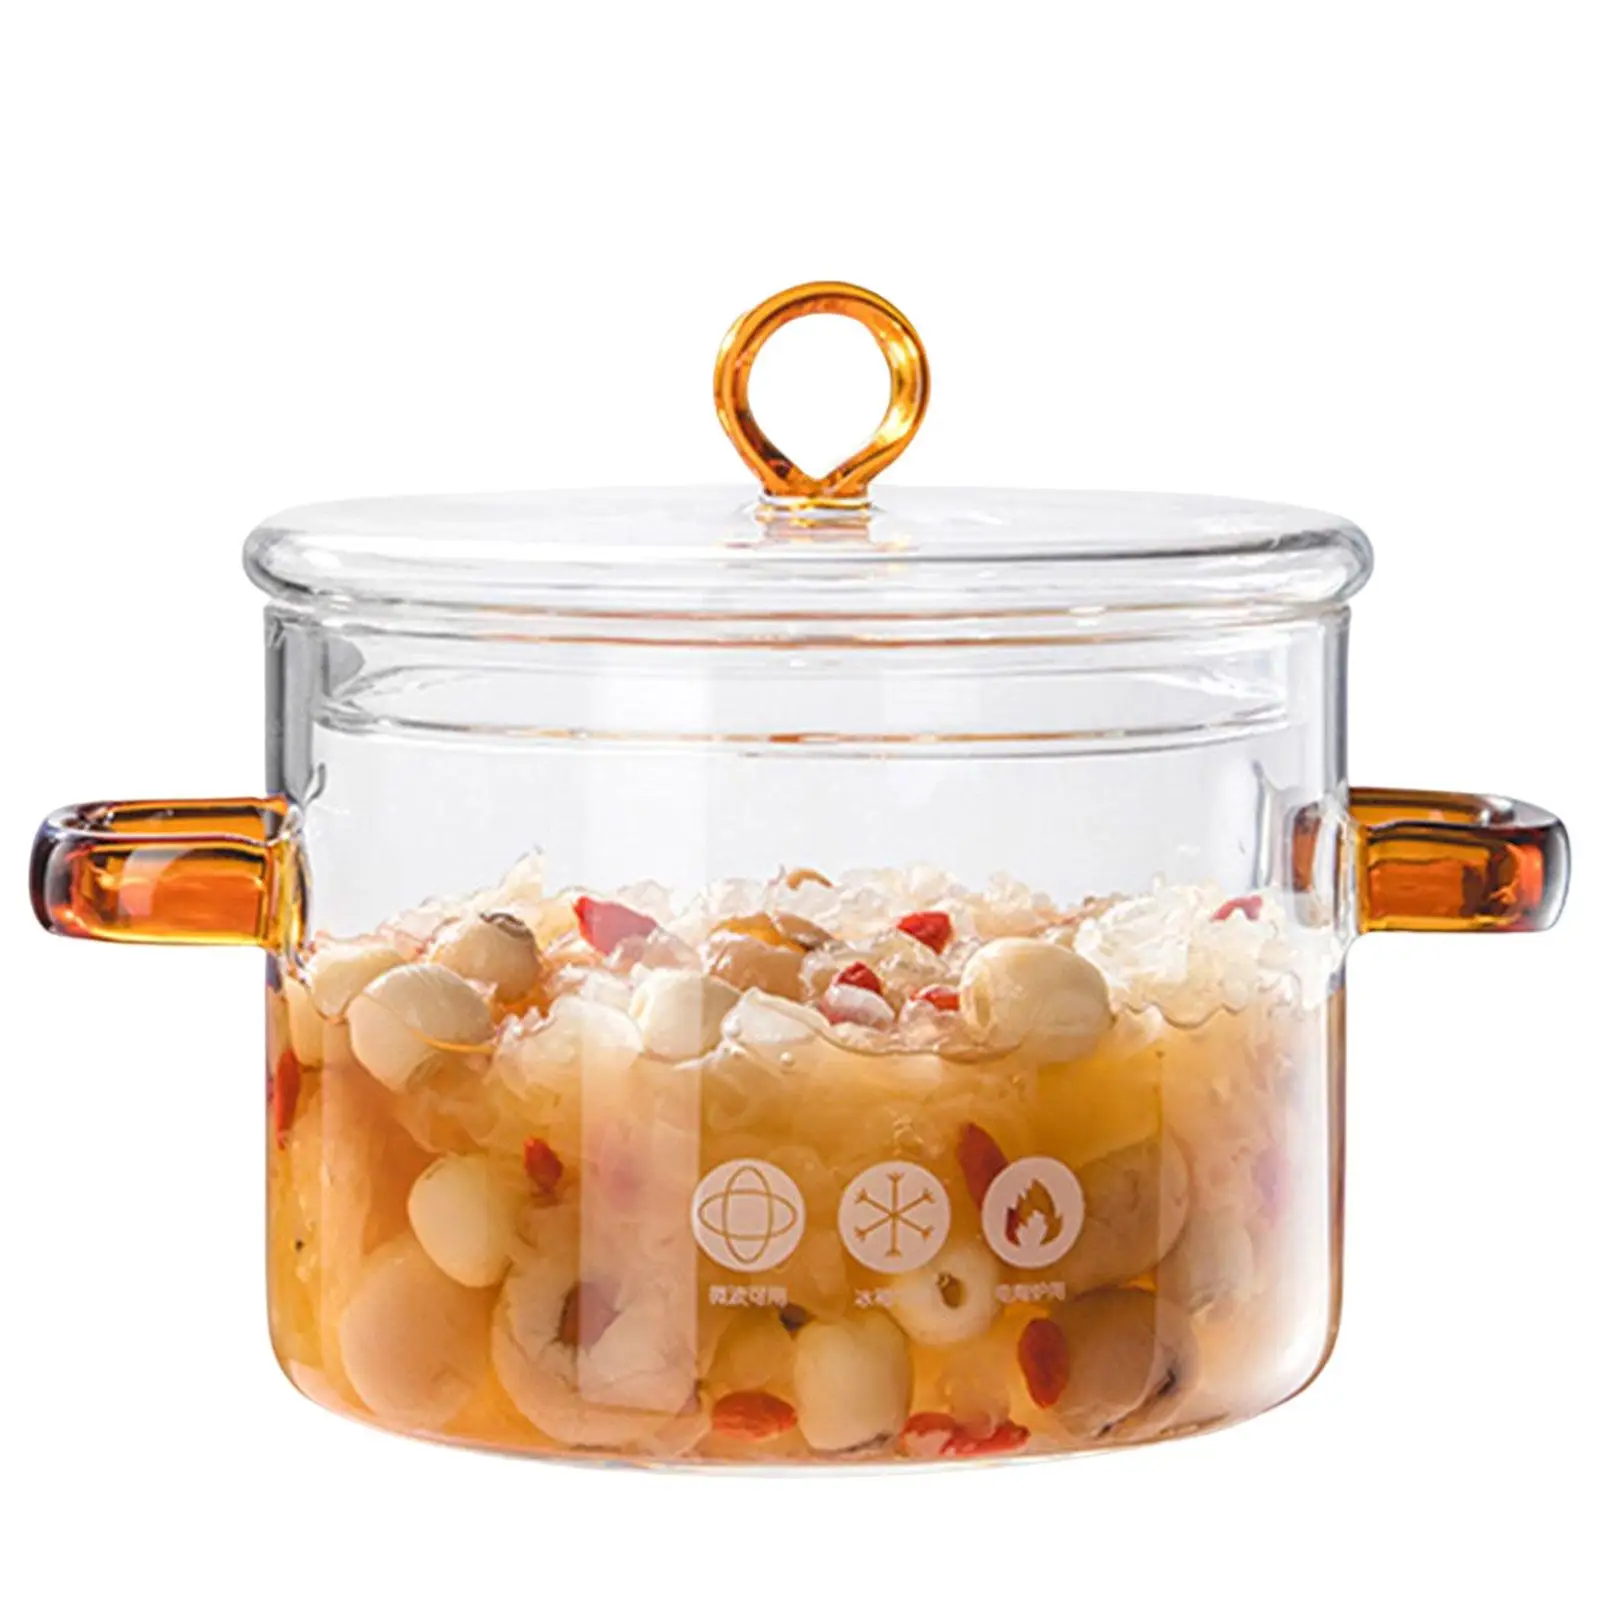 Glass Saucepan Clear Cookware with Lid Stockpots Microwave Heating Cooking Pot Simmer Pot for Tea Pasta Noodle Kitchen Milk Soup